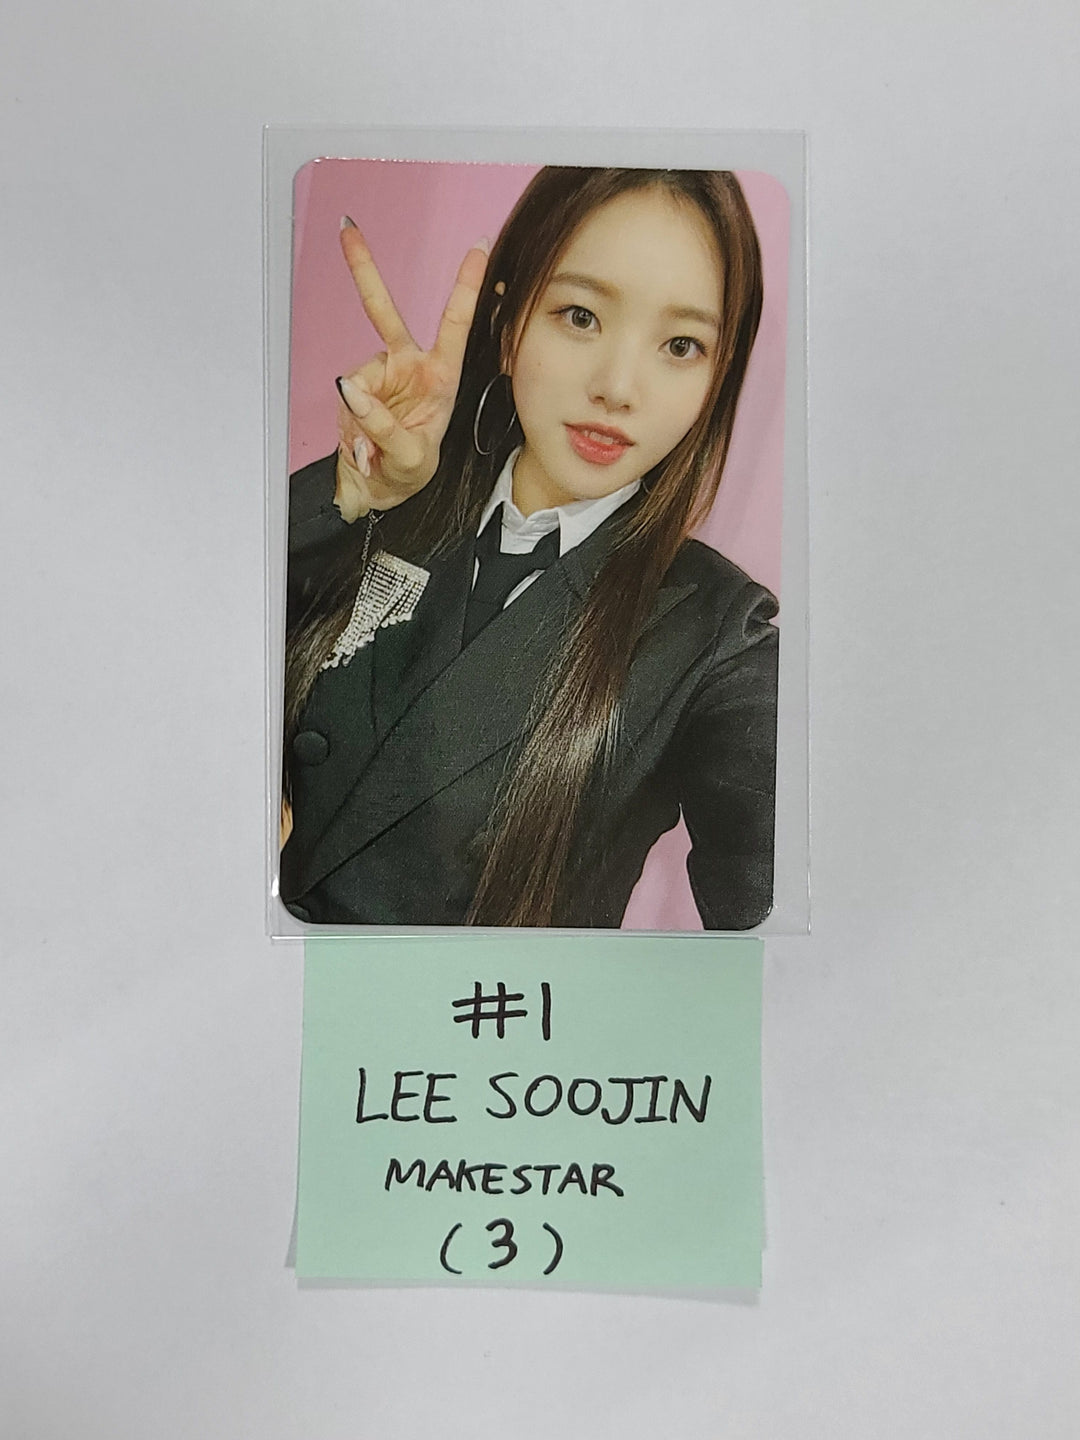 Weeekly "Play Game : AWAKE" - Makestar Fansign Event Photocard Round 2 [Updated 4/6]